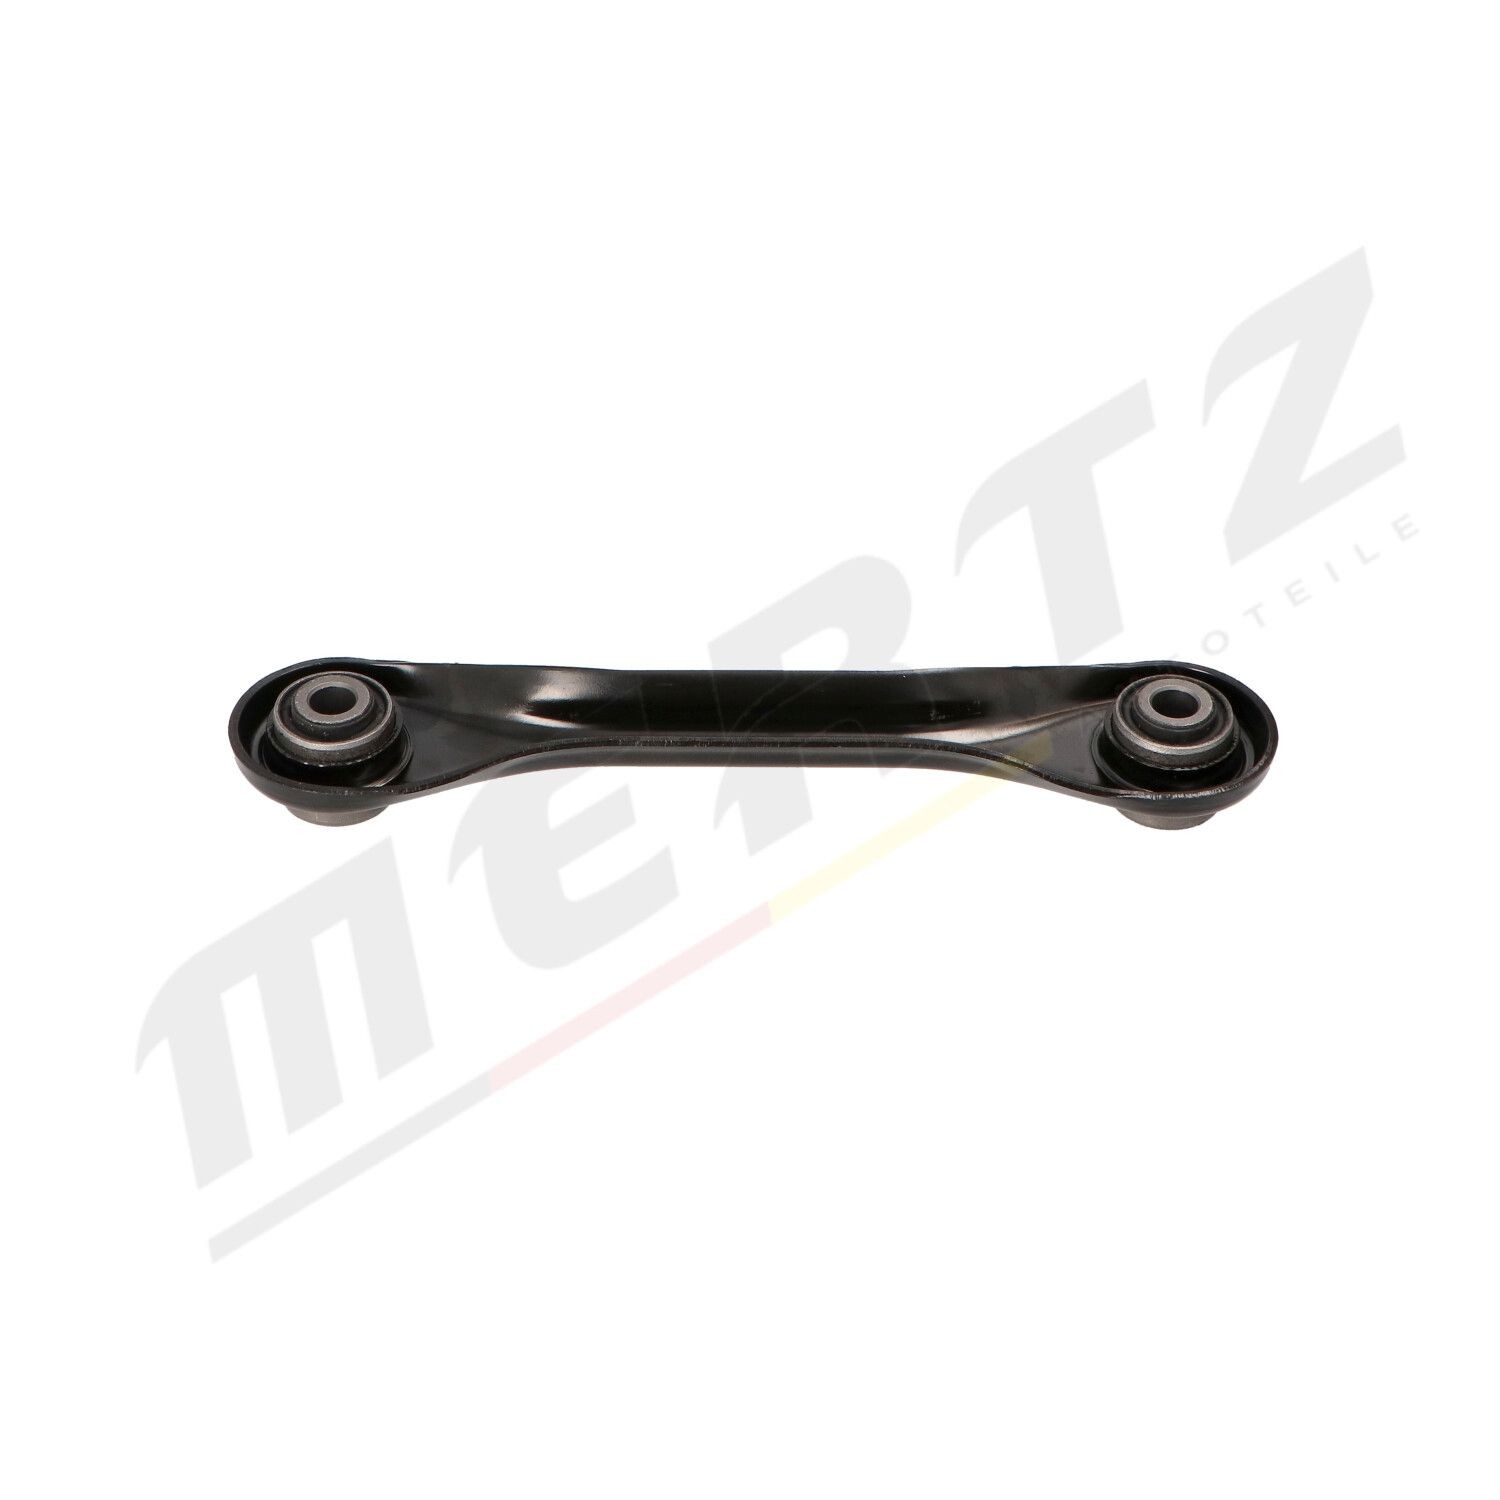 M-S2368 Suspension wishbone arm M-S2368 MERTZ with bearing(s), Rear Axle Left, Rear Axle Right, Lower, Control Arm, Sheet Steel